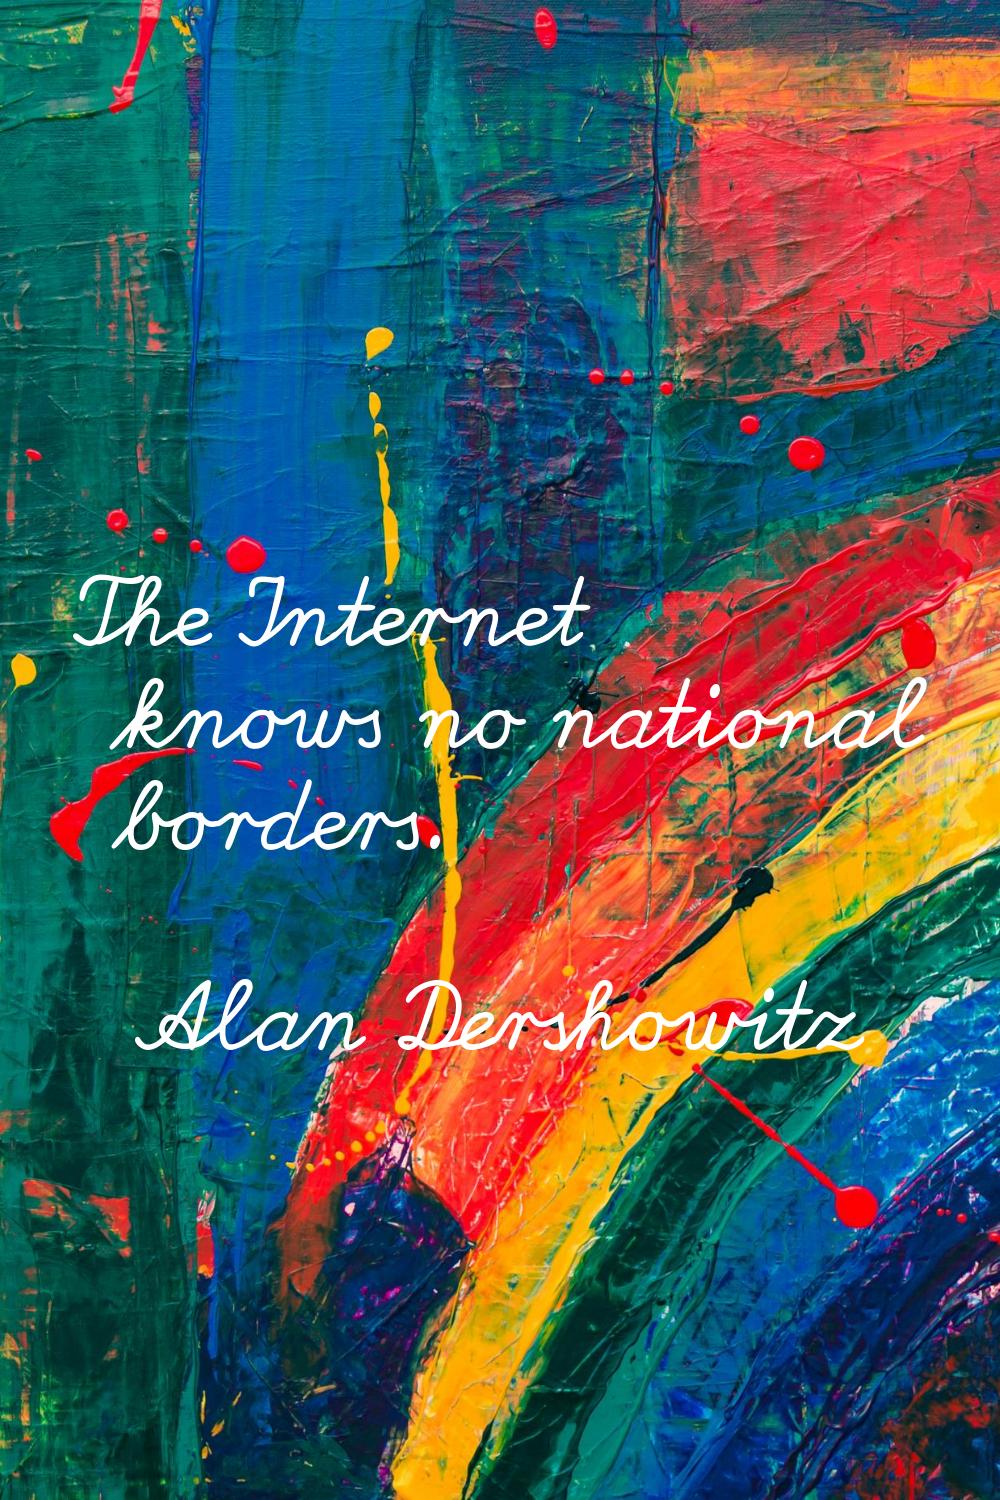 The Internet knows no national borders.